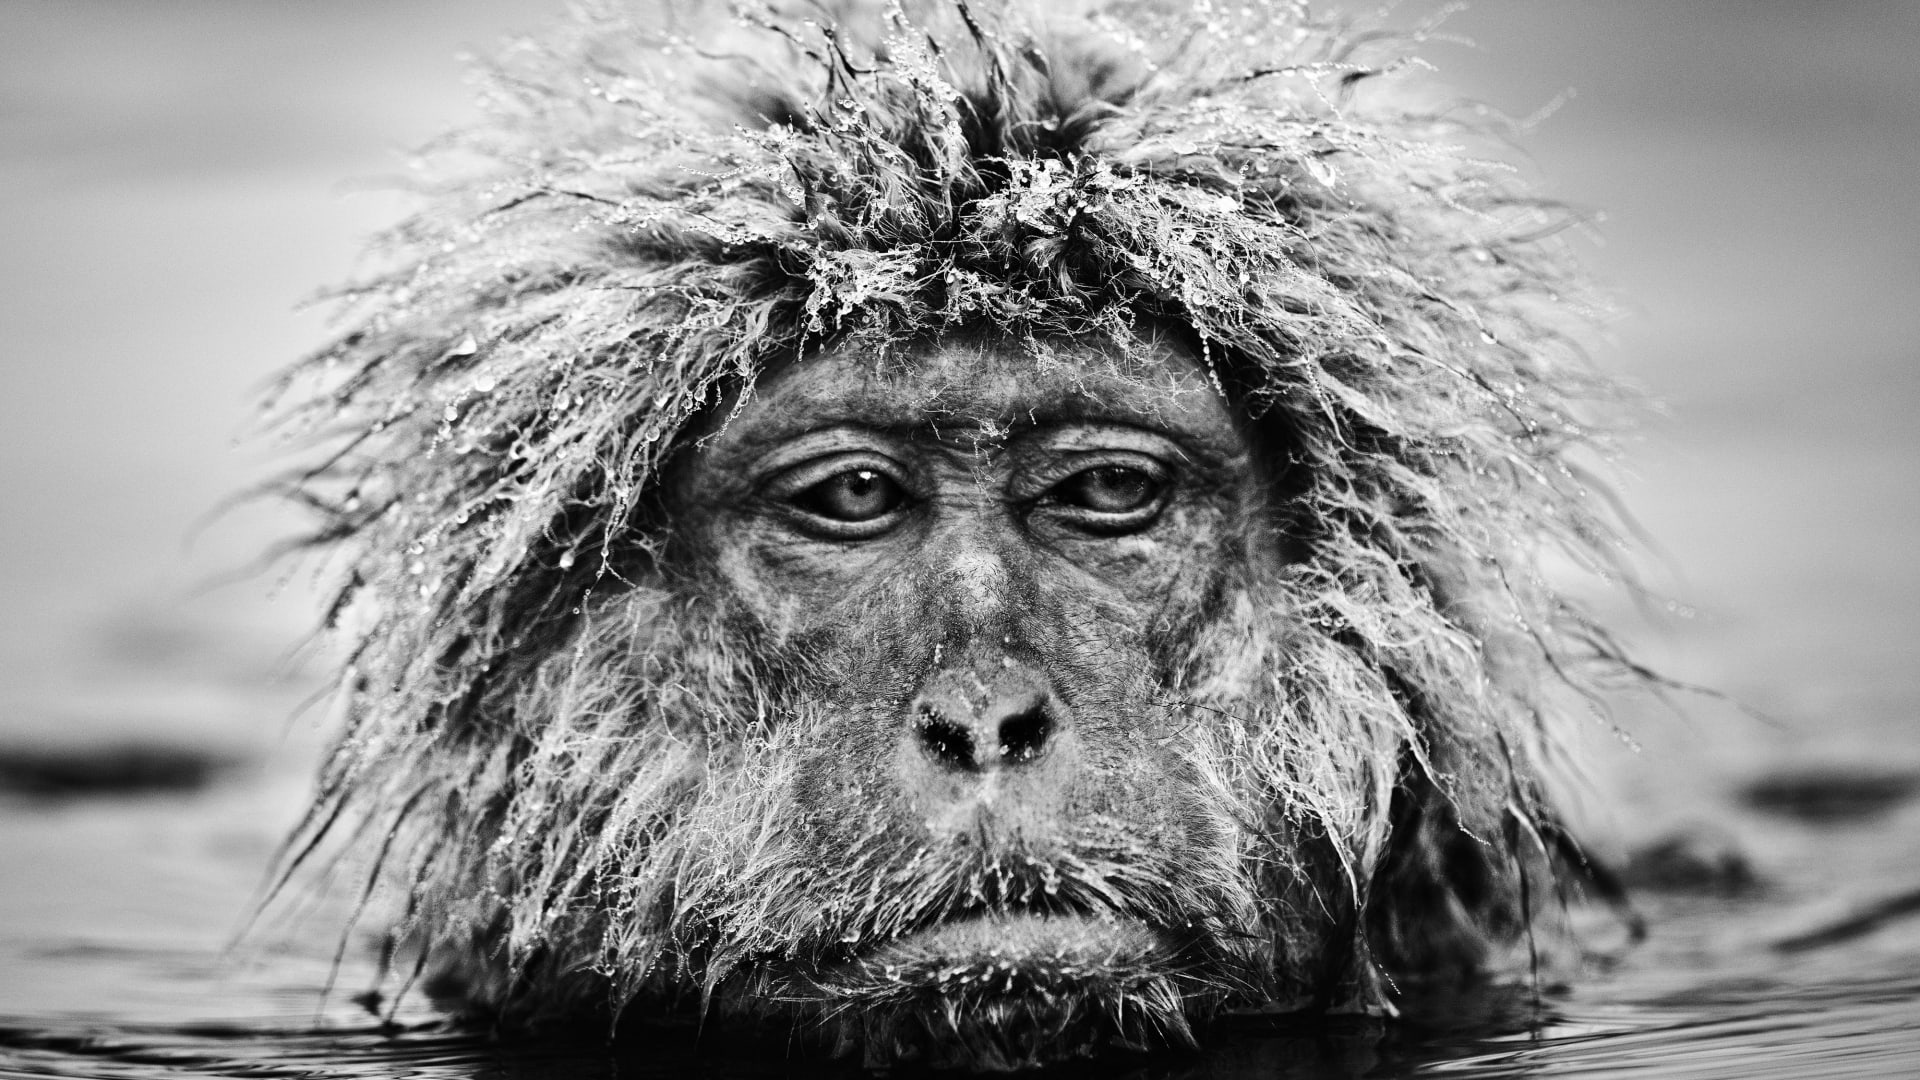 His work has earned him millions .. Celebrity and wildlife photographer reveals the secrets behind his most iconic images